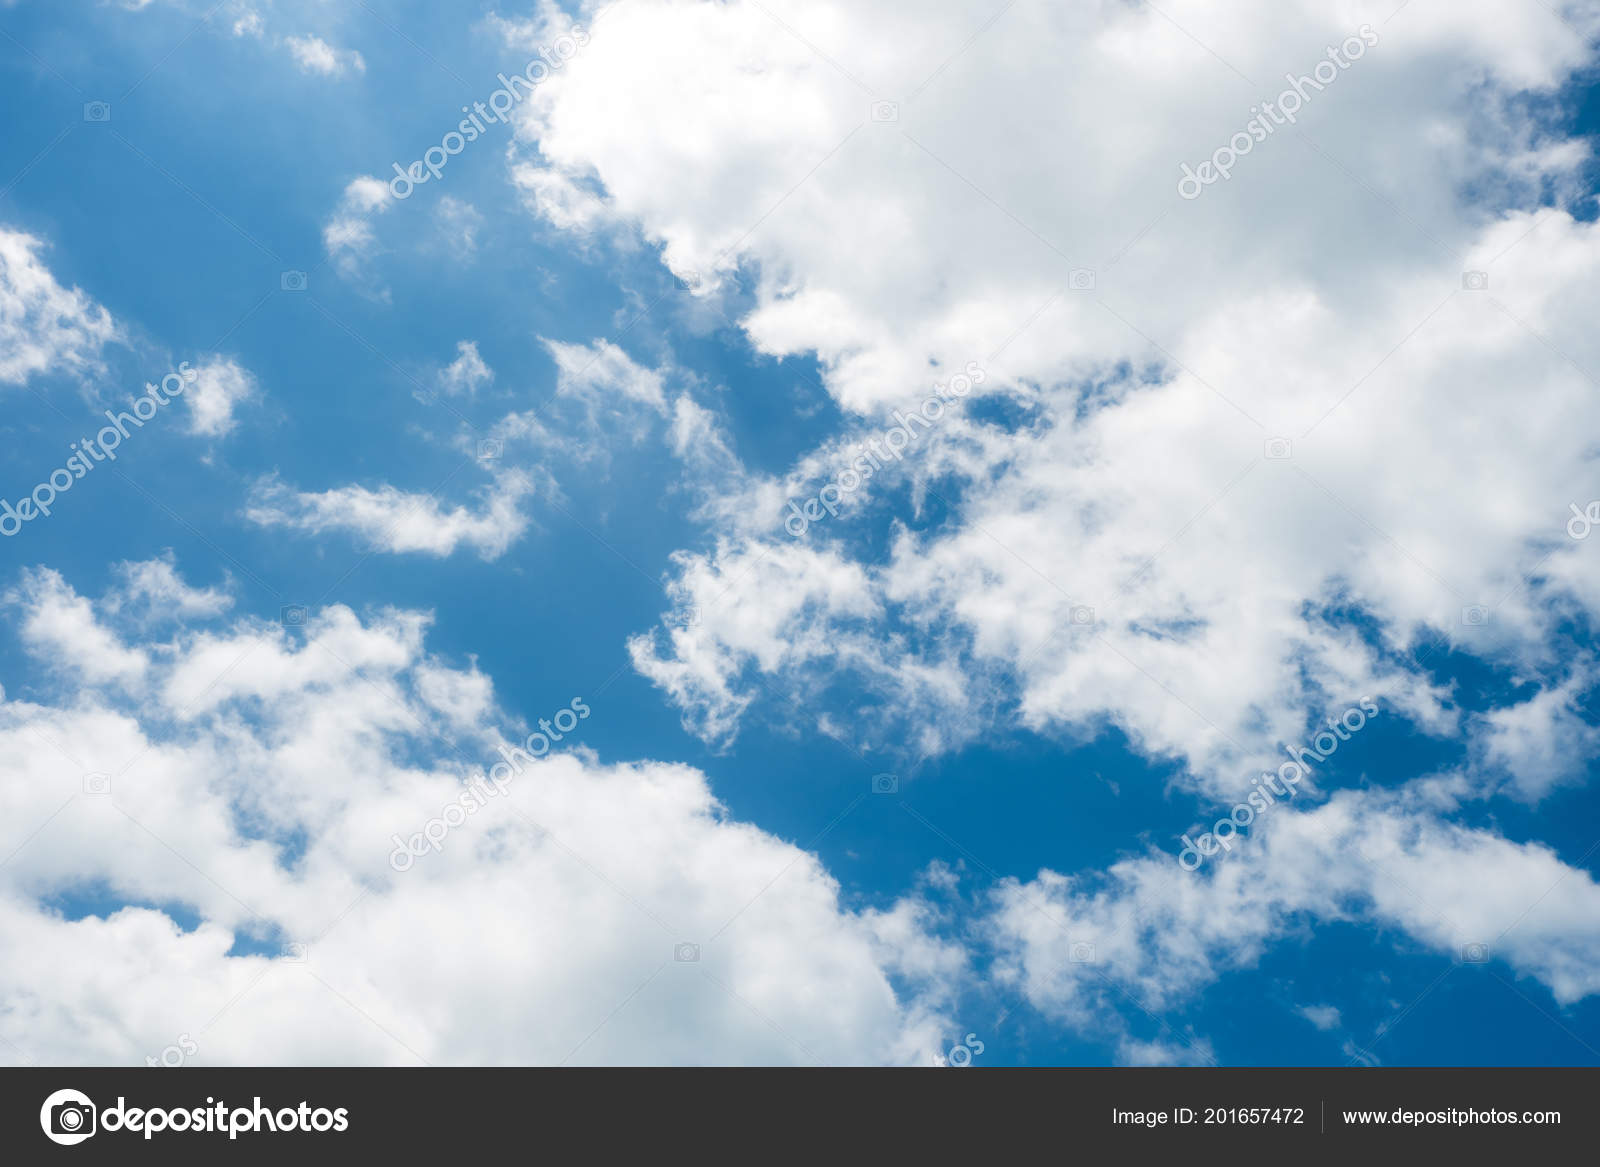 Blue Summer Sky Clouds Bright Morning Sky Background Stock Photo Image By C Cherayut000